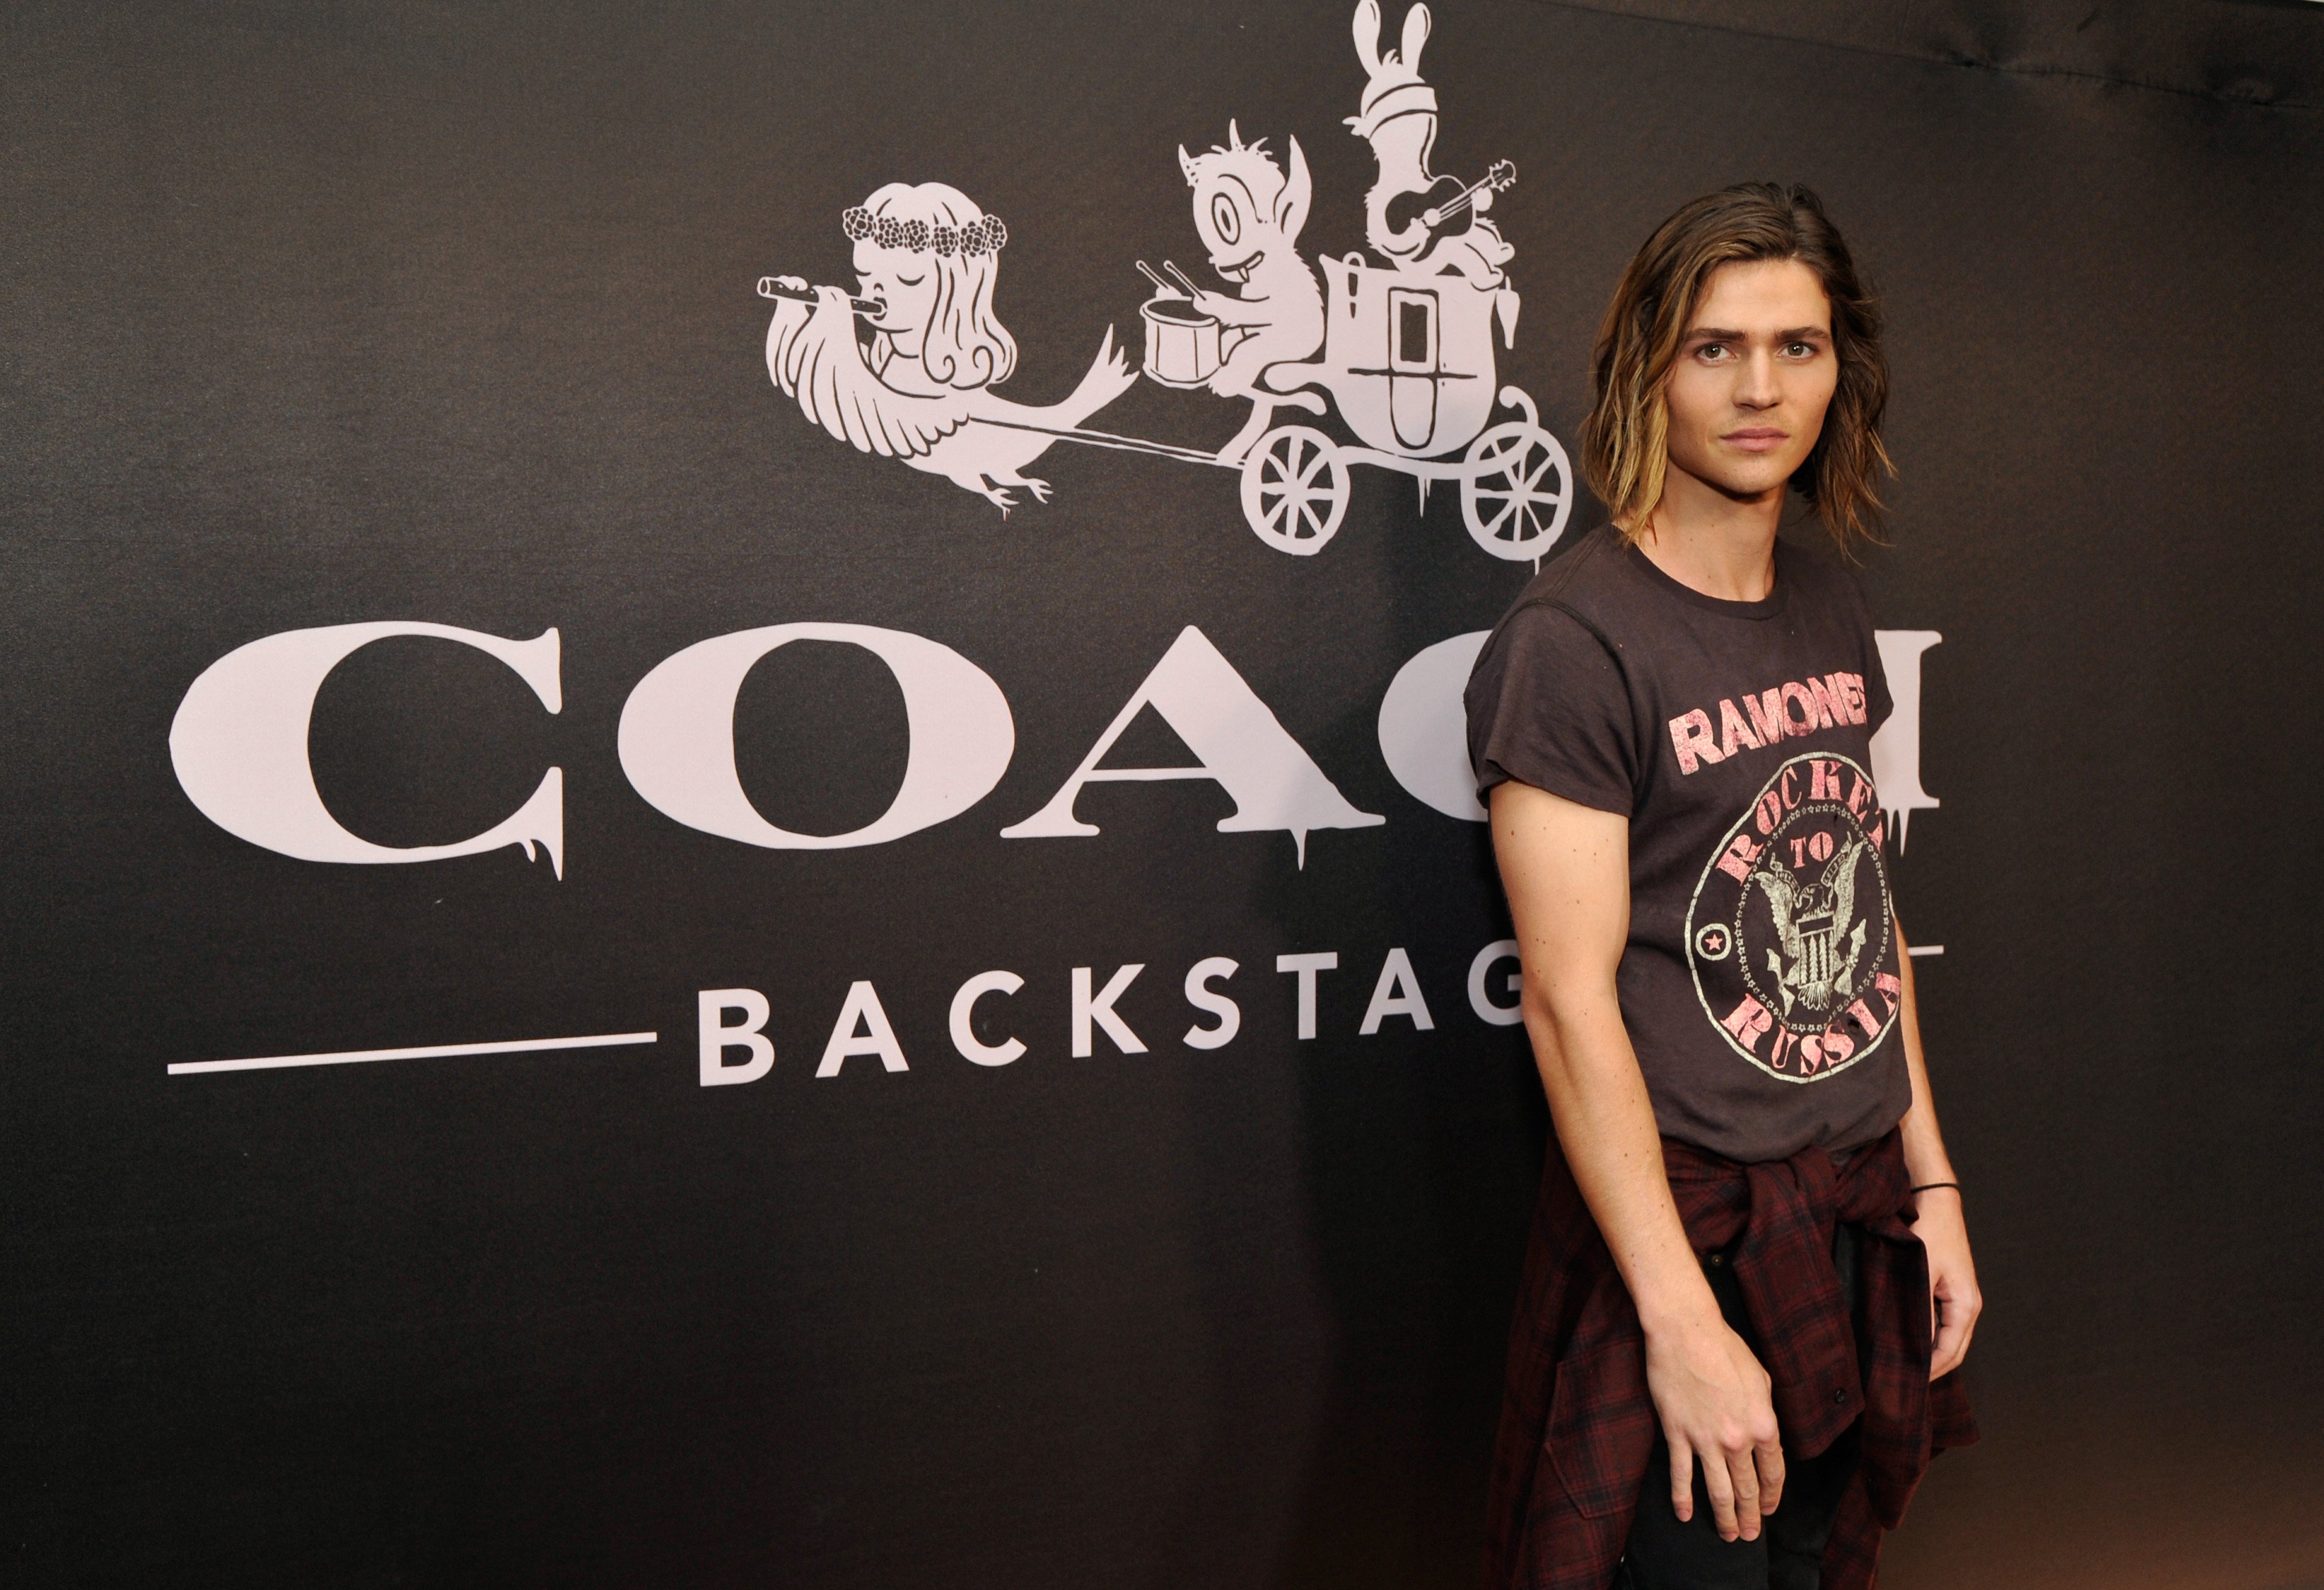 Will Peltz attends Coach Backstage Rodeo Drive on December 11, 2014 in Beverly Hills, California.